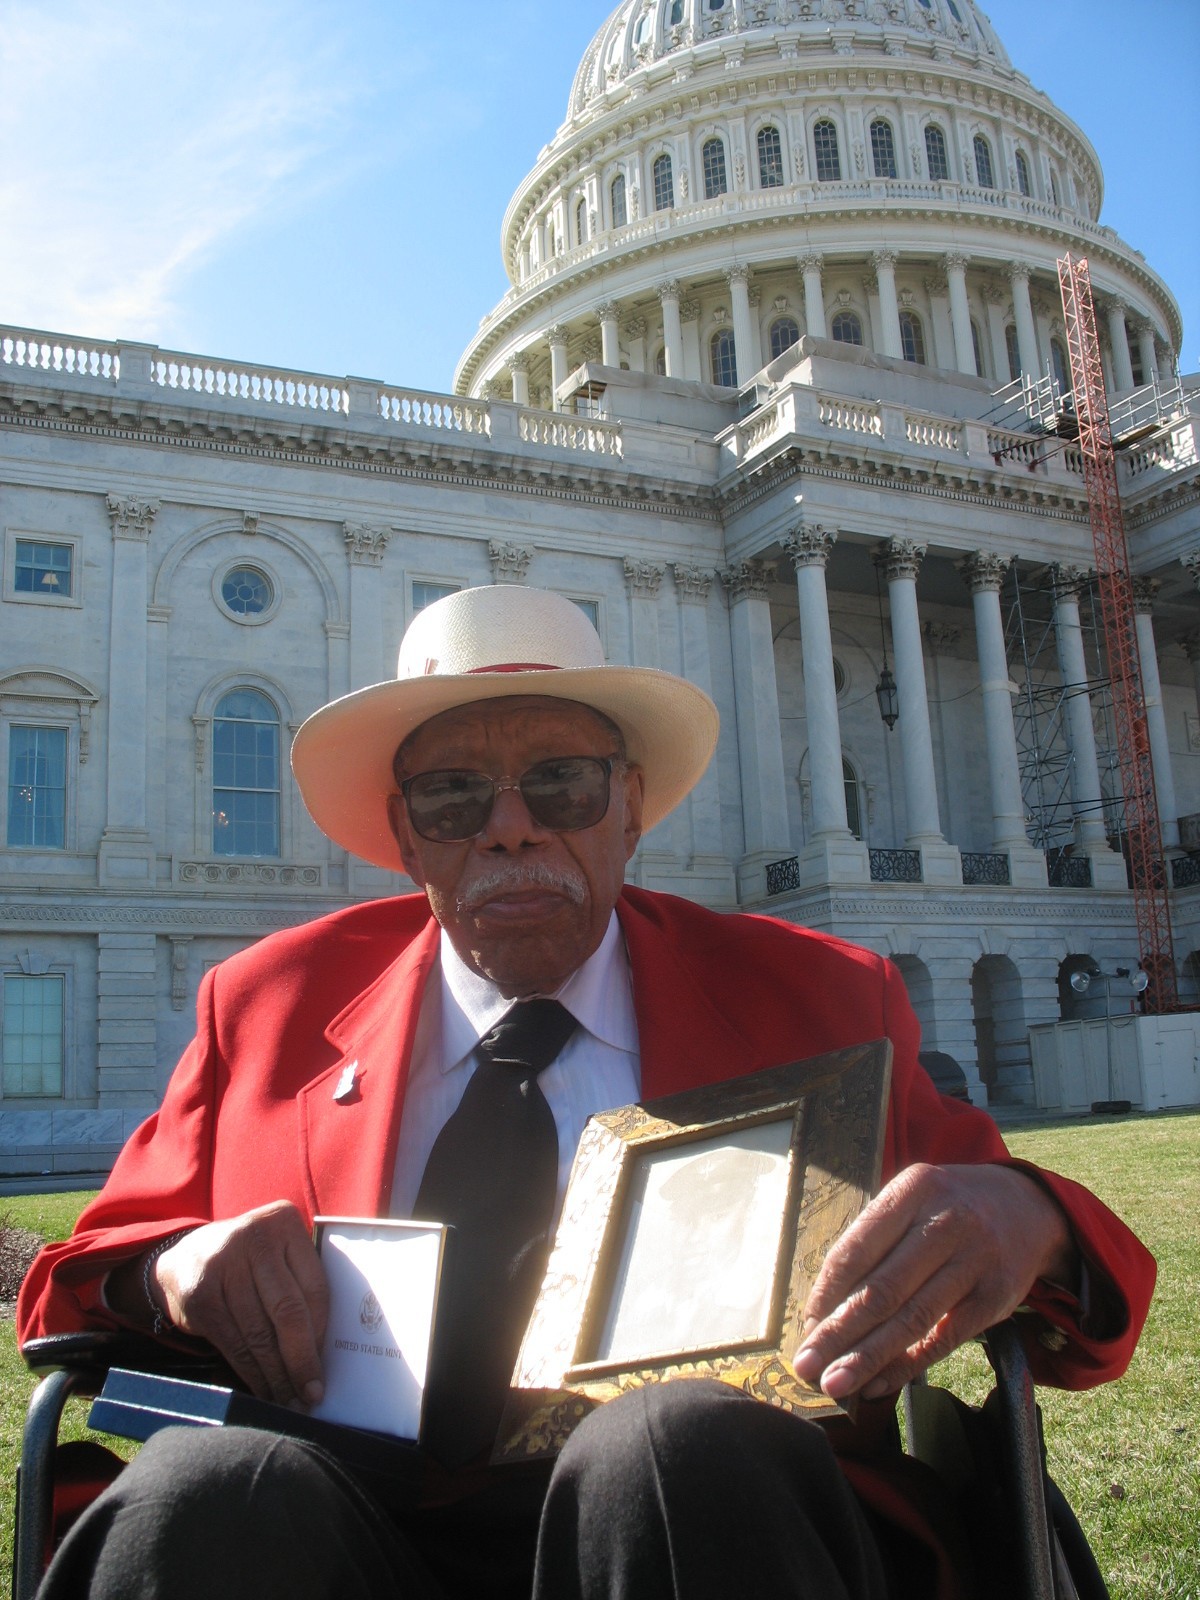 Moe Thomas Jr. poses outside the U.S. Capitol with a Congressional Gold Medal and a framed photo of himself as a young airman.